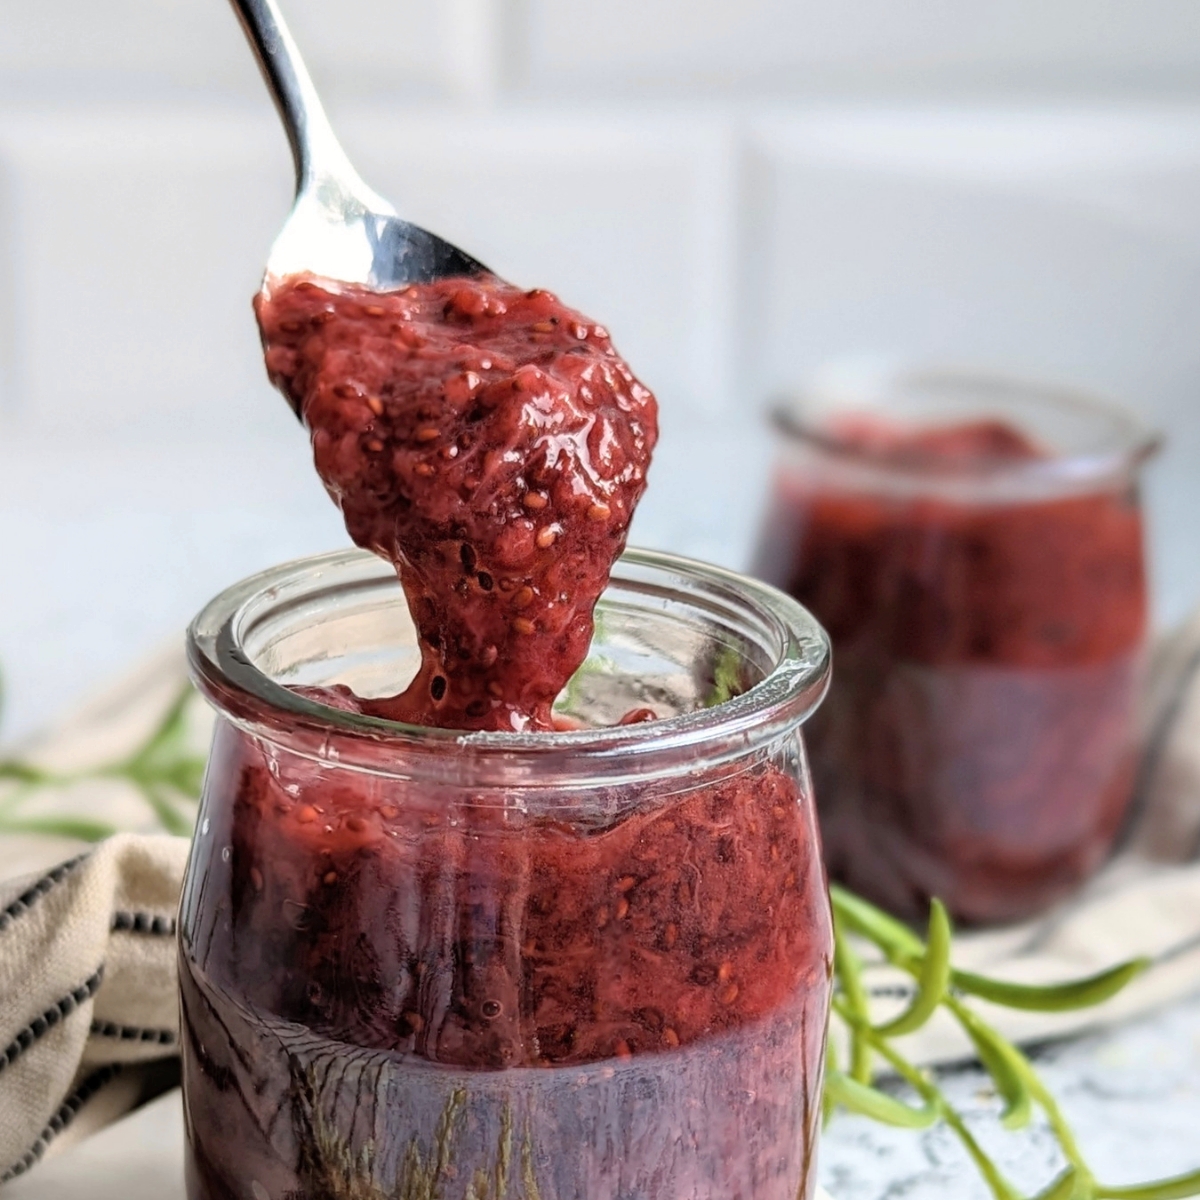 reduced sugar strawberry jam with frozen strawberries chia seeds and lemon juice less sugar than traditional jam